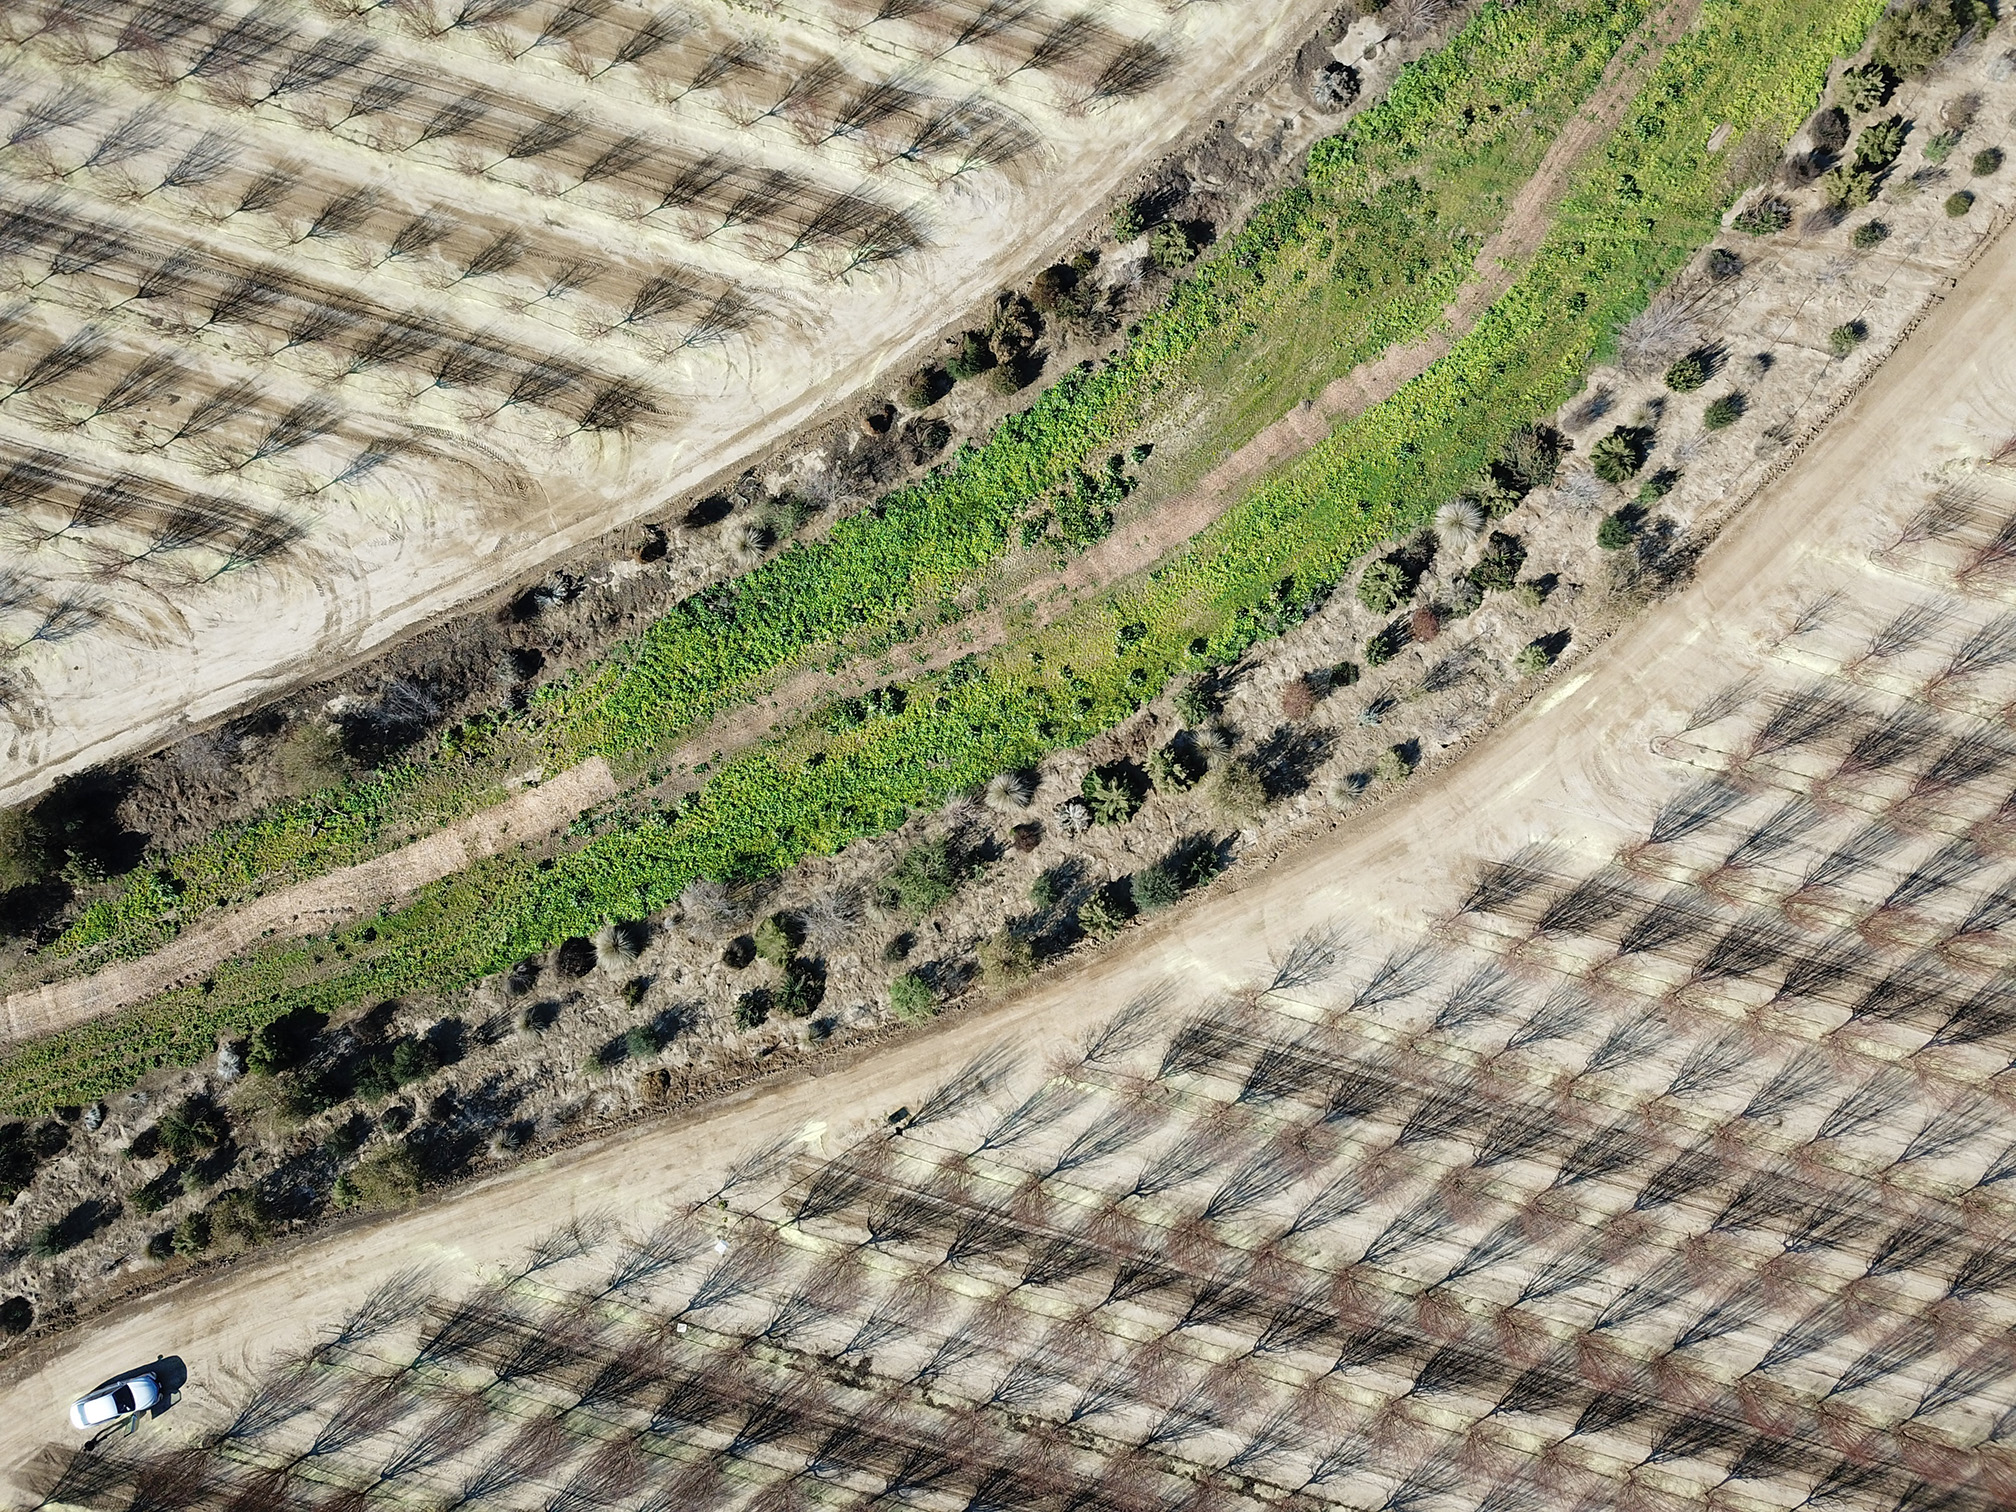 An aerial view looking directly down on a farm. The upper and lower parts of the photo show rows of almond trees. Across the middle stretches a creek channel which has been planted with shrubs and flowers as habitat for pollinators.